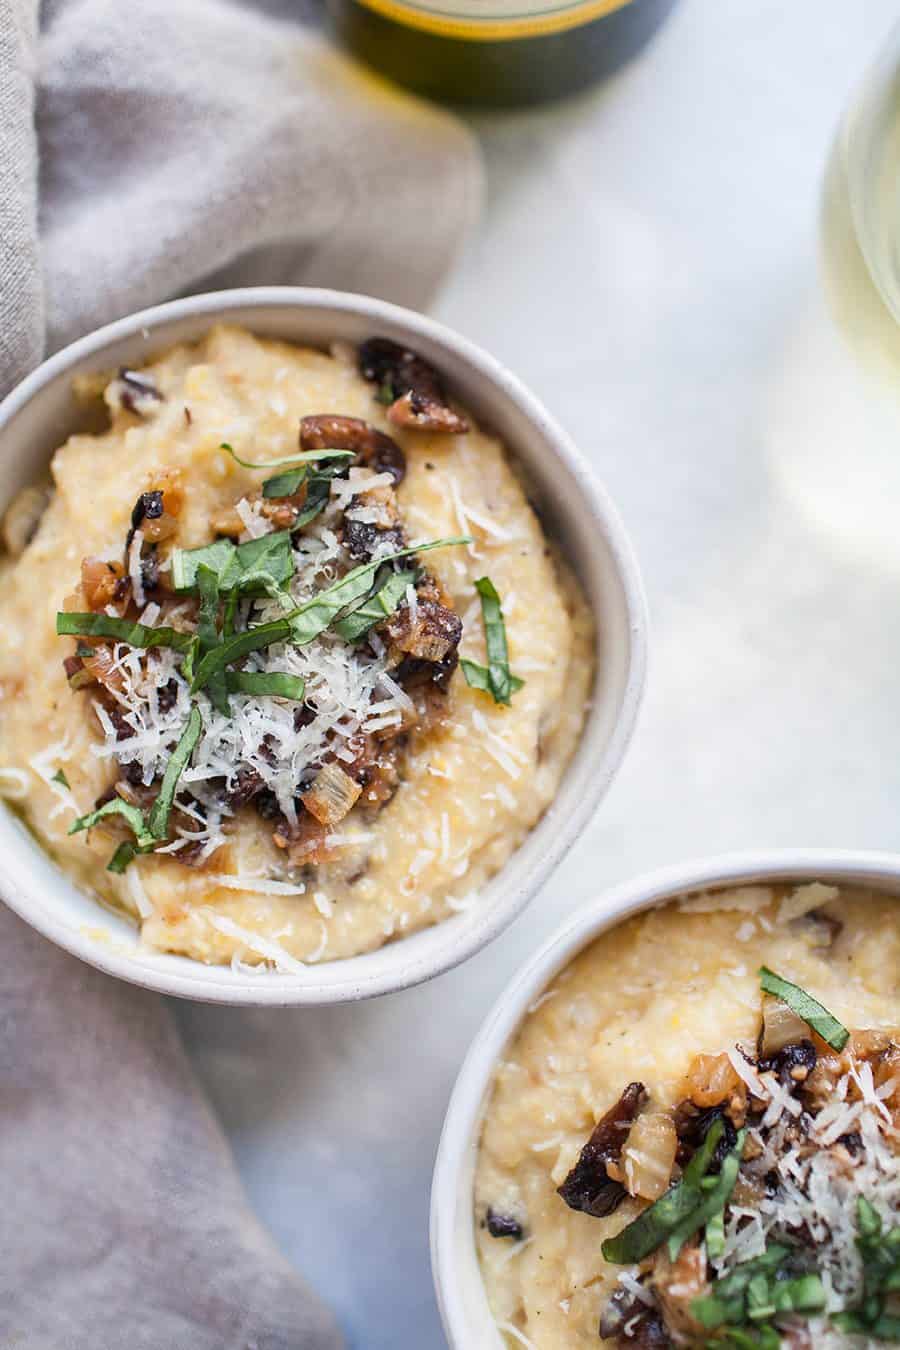 Two bowls of creamy risotto with mushrooms and parmesan cheese.